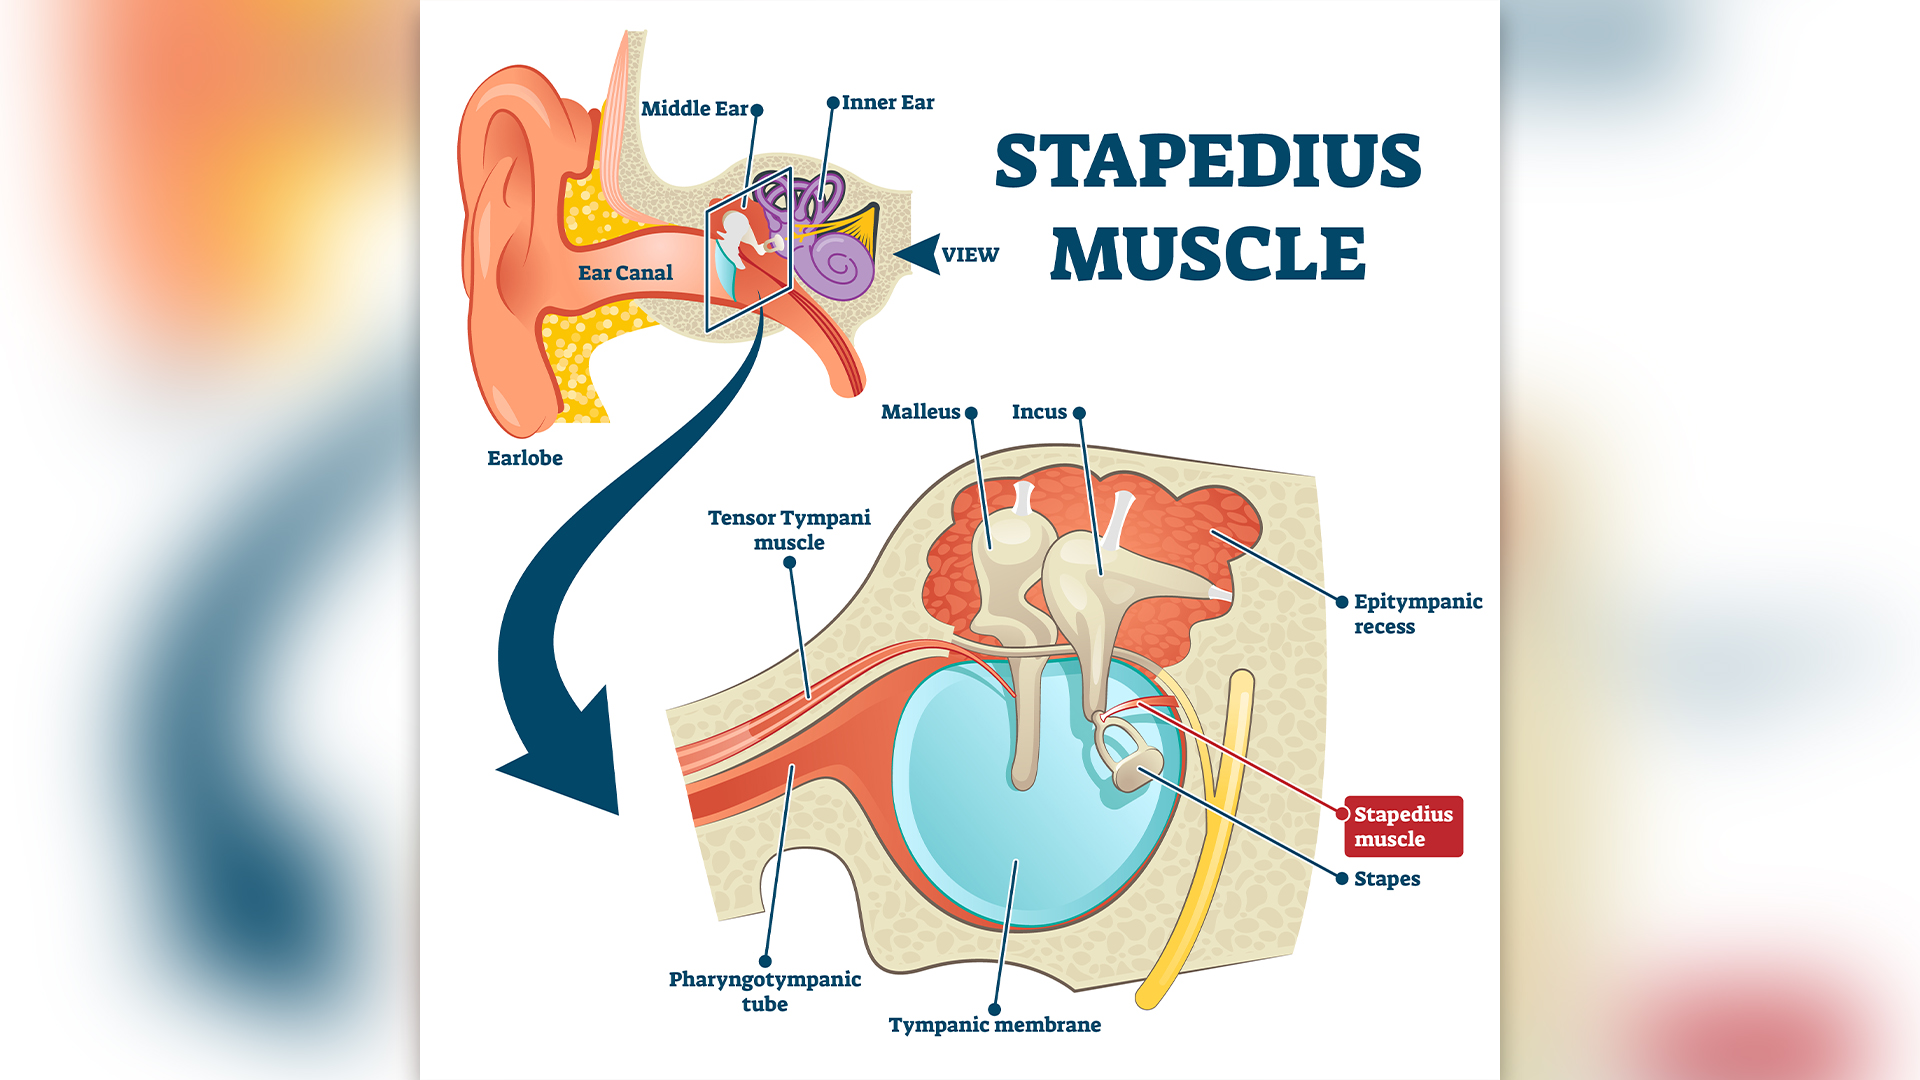 A labeled diagram showing the location of the middle ear, then enlarged to show where the stapes connects to the stapes within the middle ear